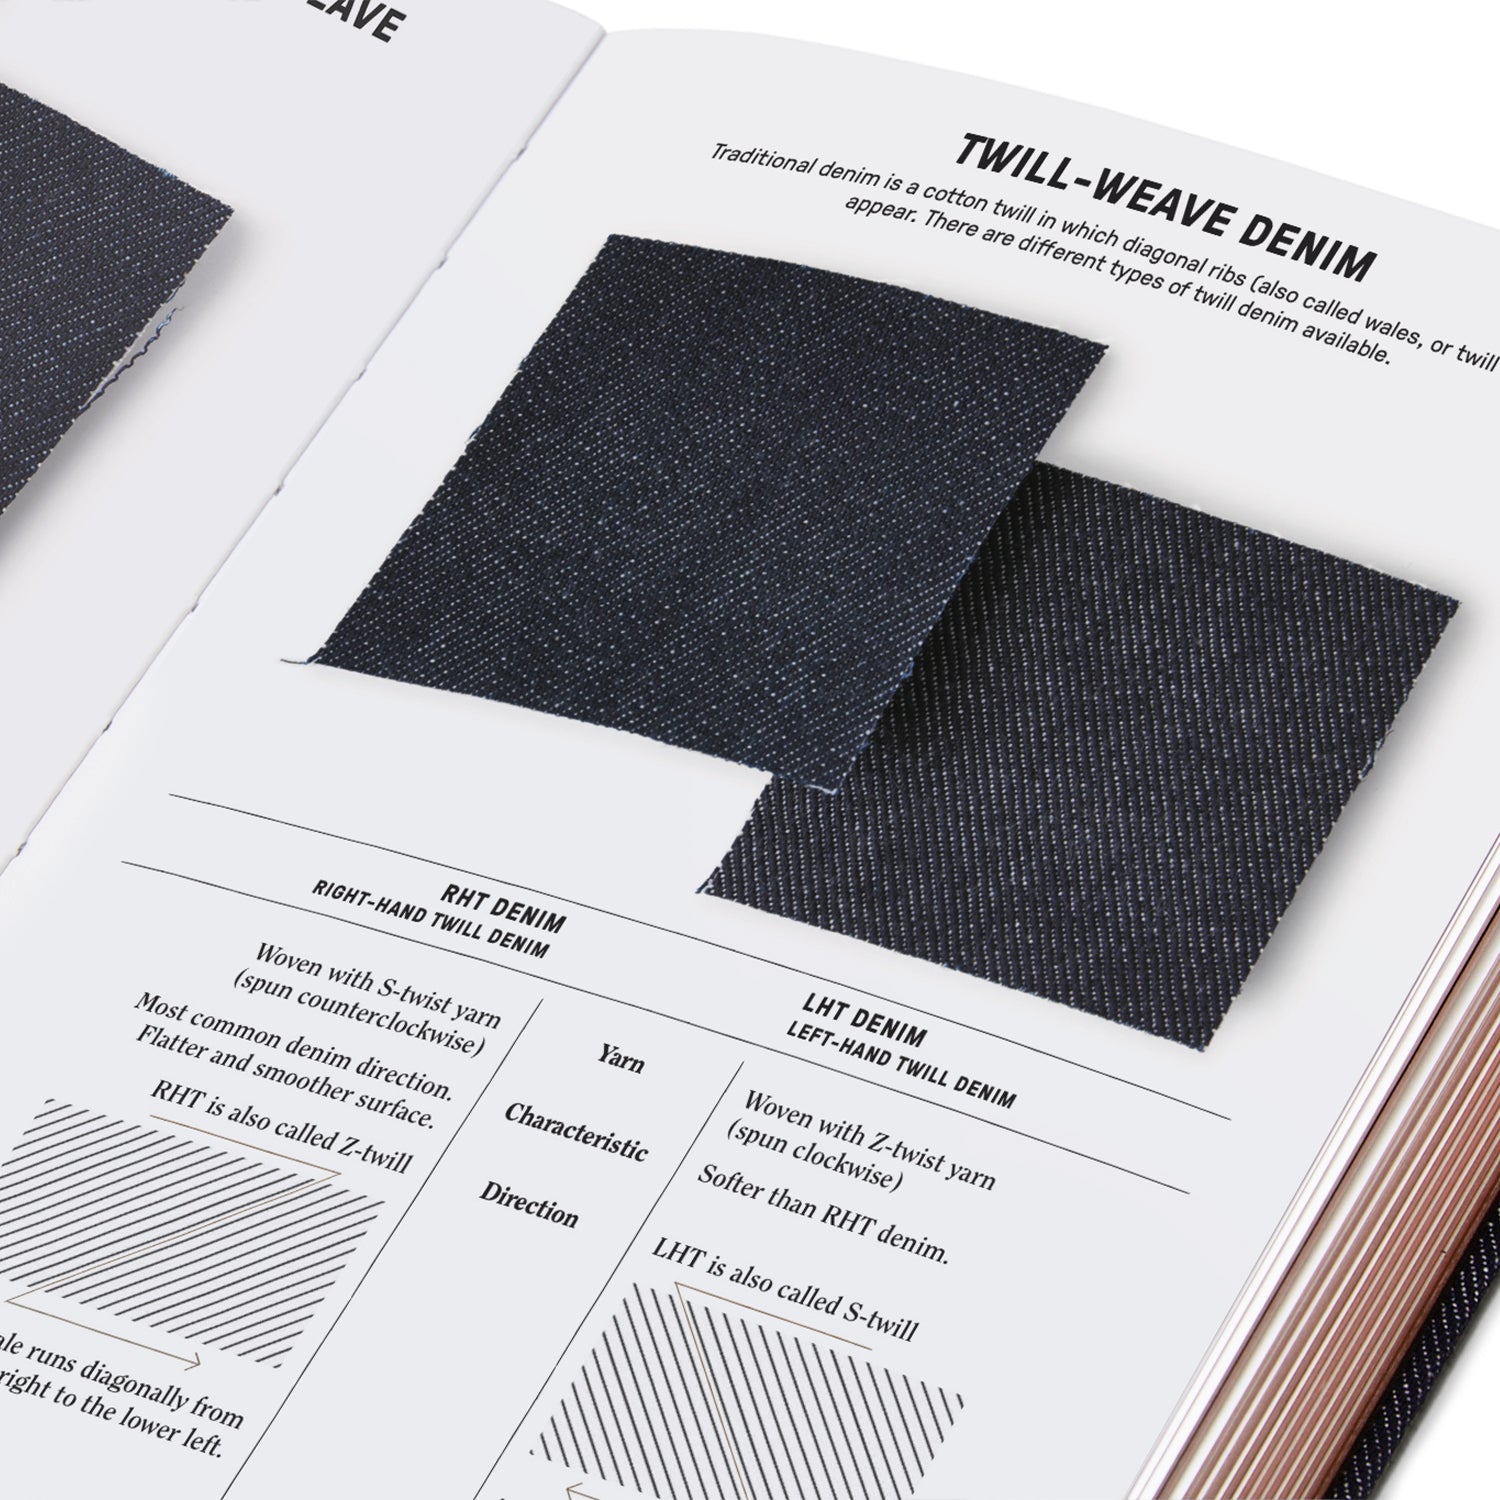 The Denim Manual: A Complete Visual Guide for the Denim Industry - Secret Location